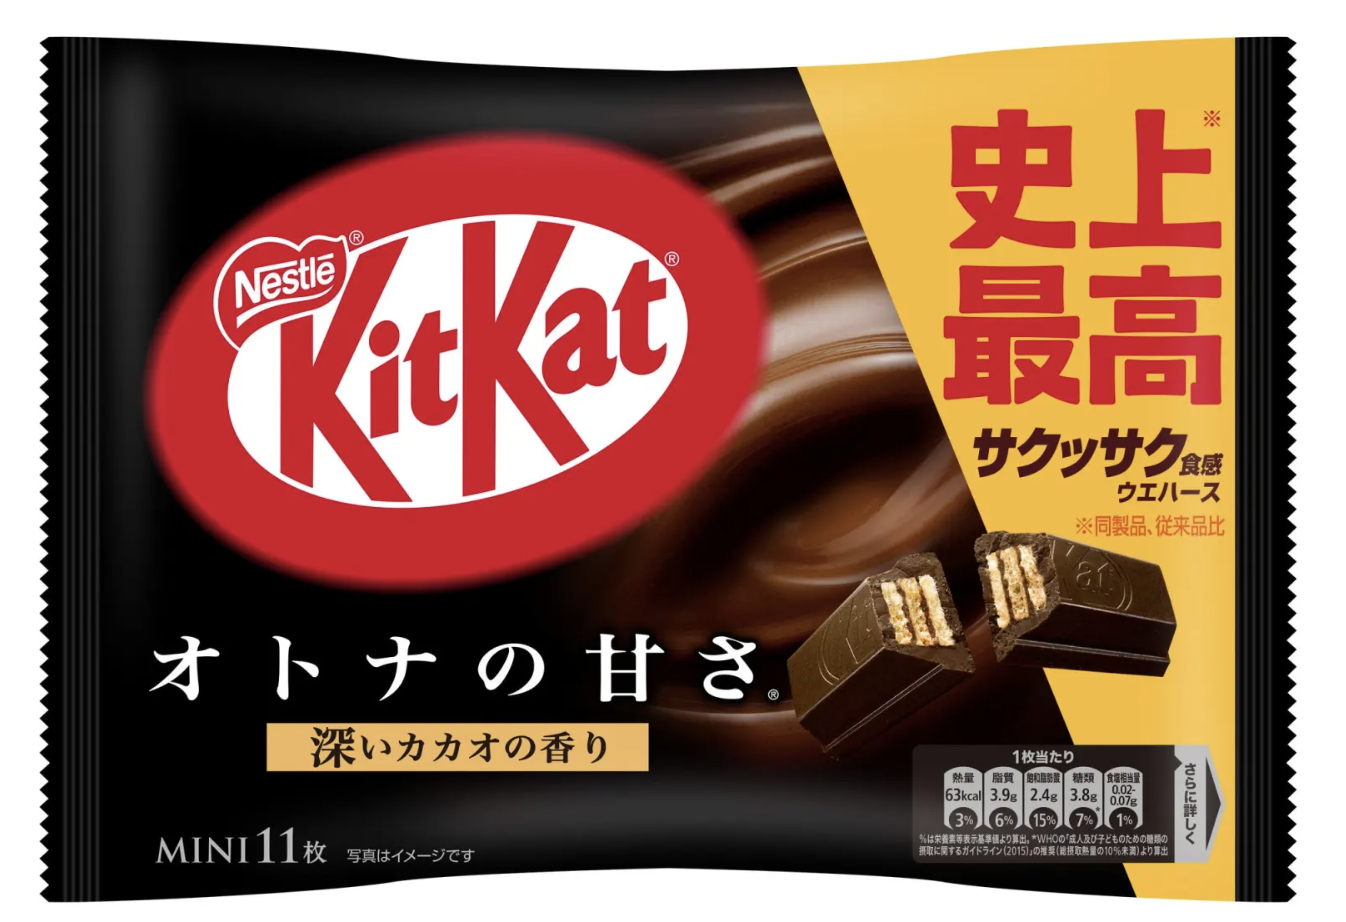 Nestlé to release ultimate perfected KitKat in honor of its 50th